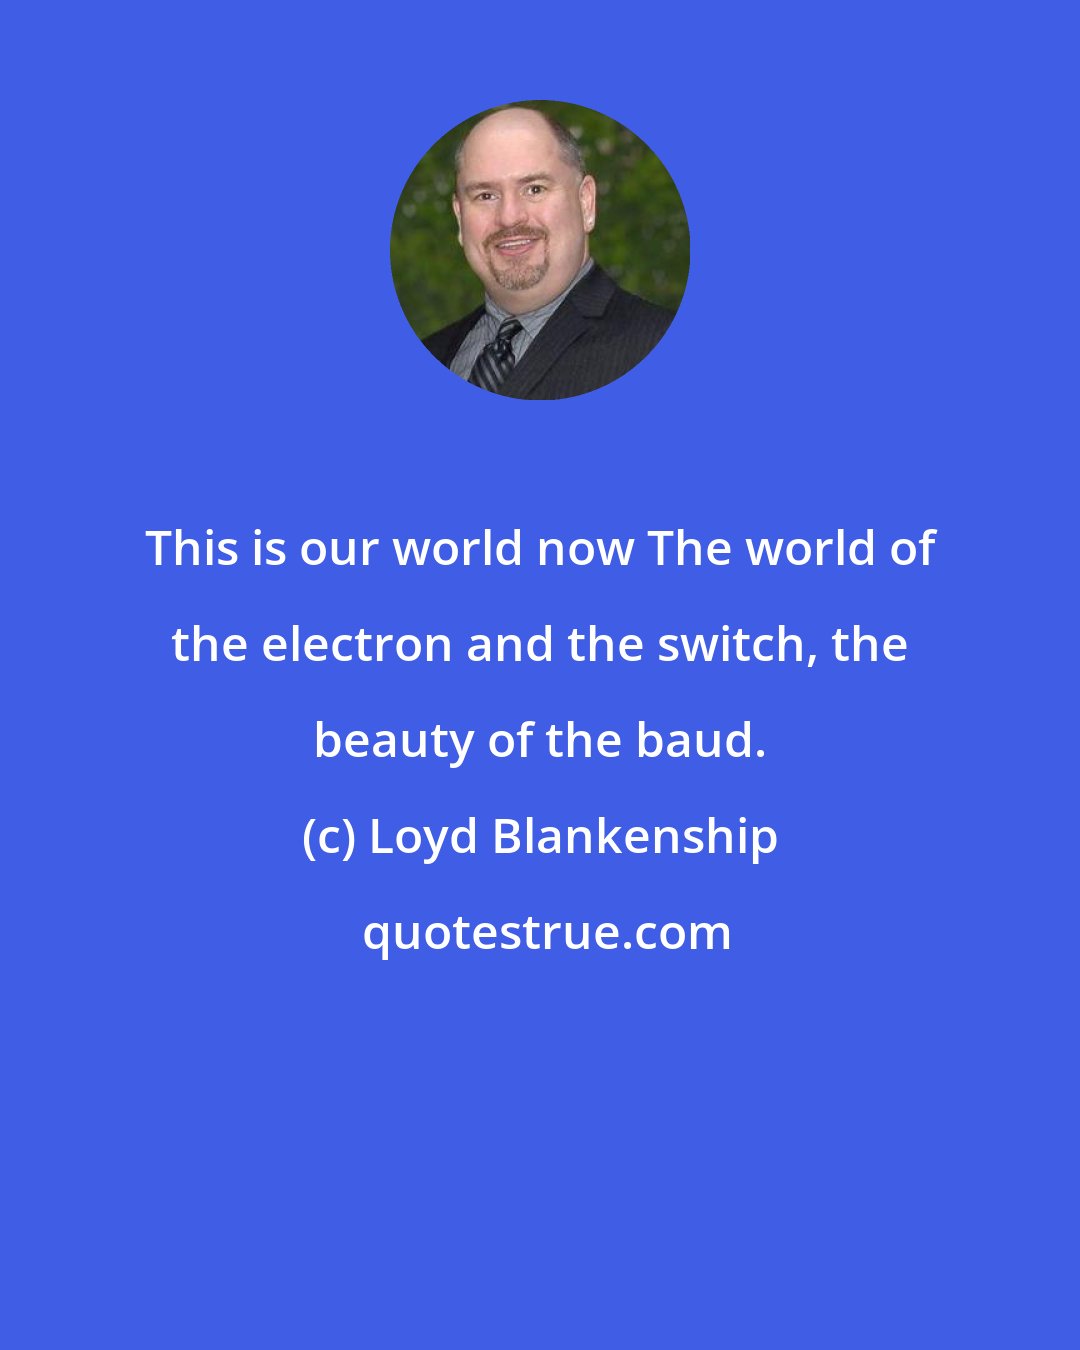 Loyd Blankenship: This is our world now The world of the electron and the switch, the beauty of the baud.